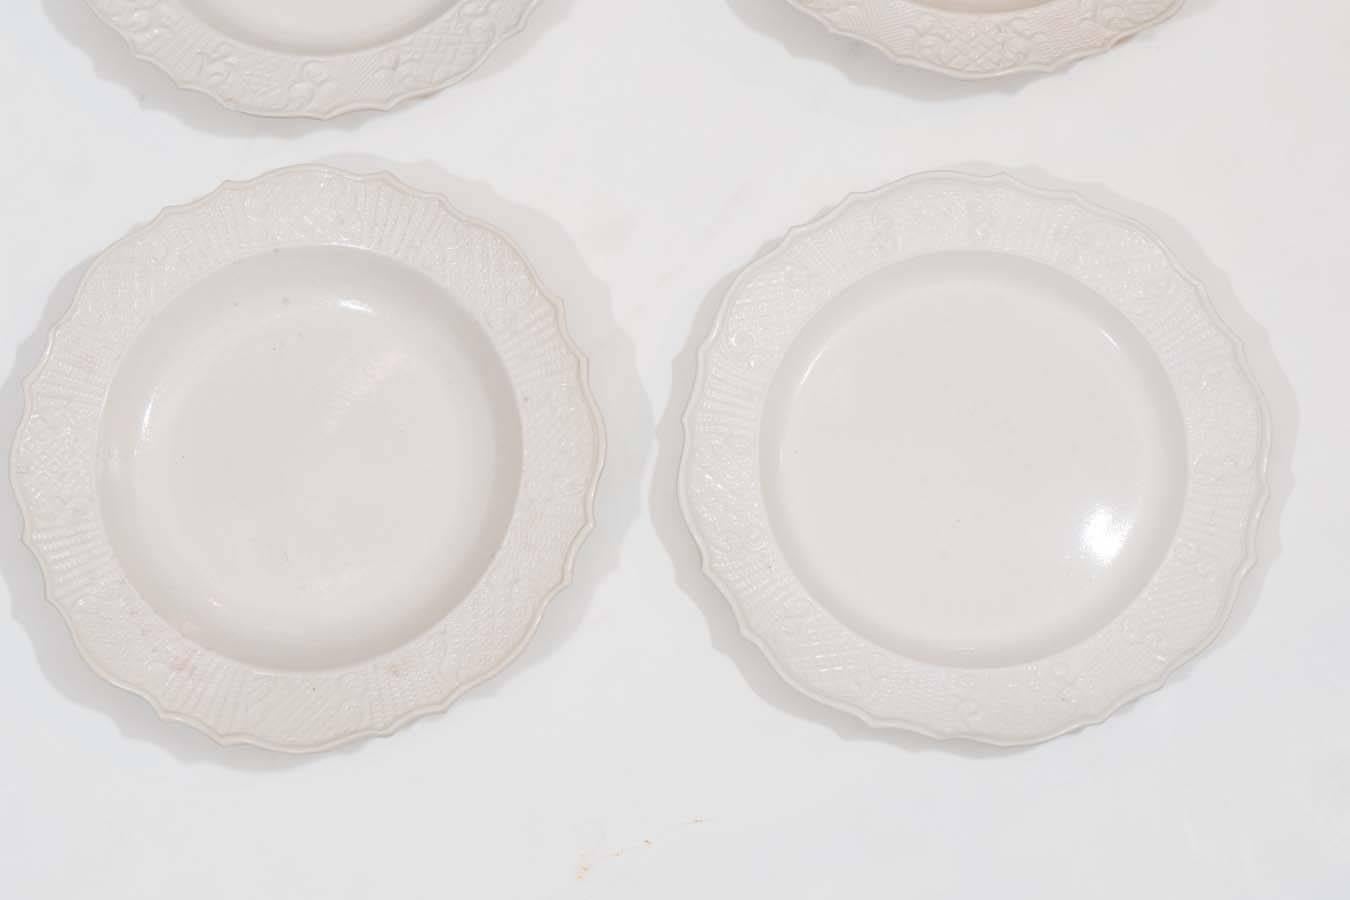 From the mid-18th century onward white body salt-glazed stoneware dinner dishes with molded borders like these were often found on the tables of colonial America. This group of dishes and deep dishes are decorated on the borders with two of the most